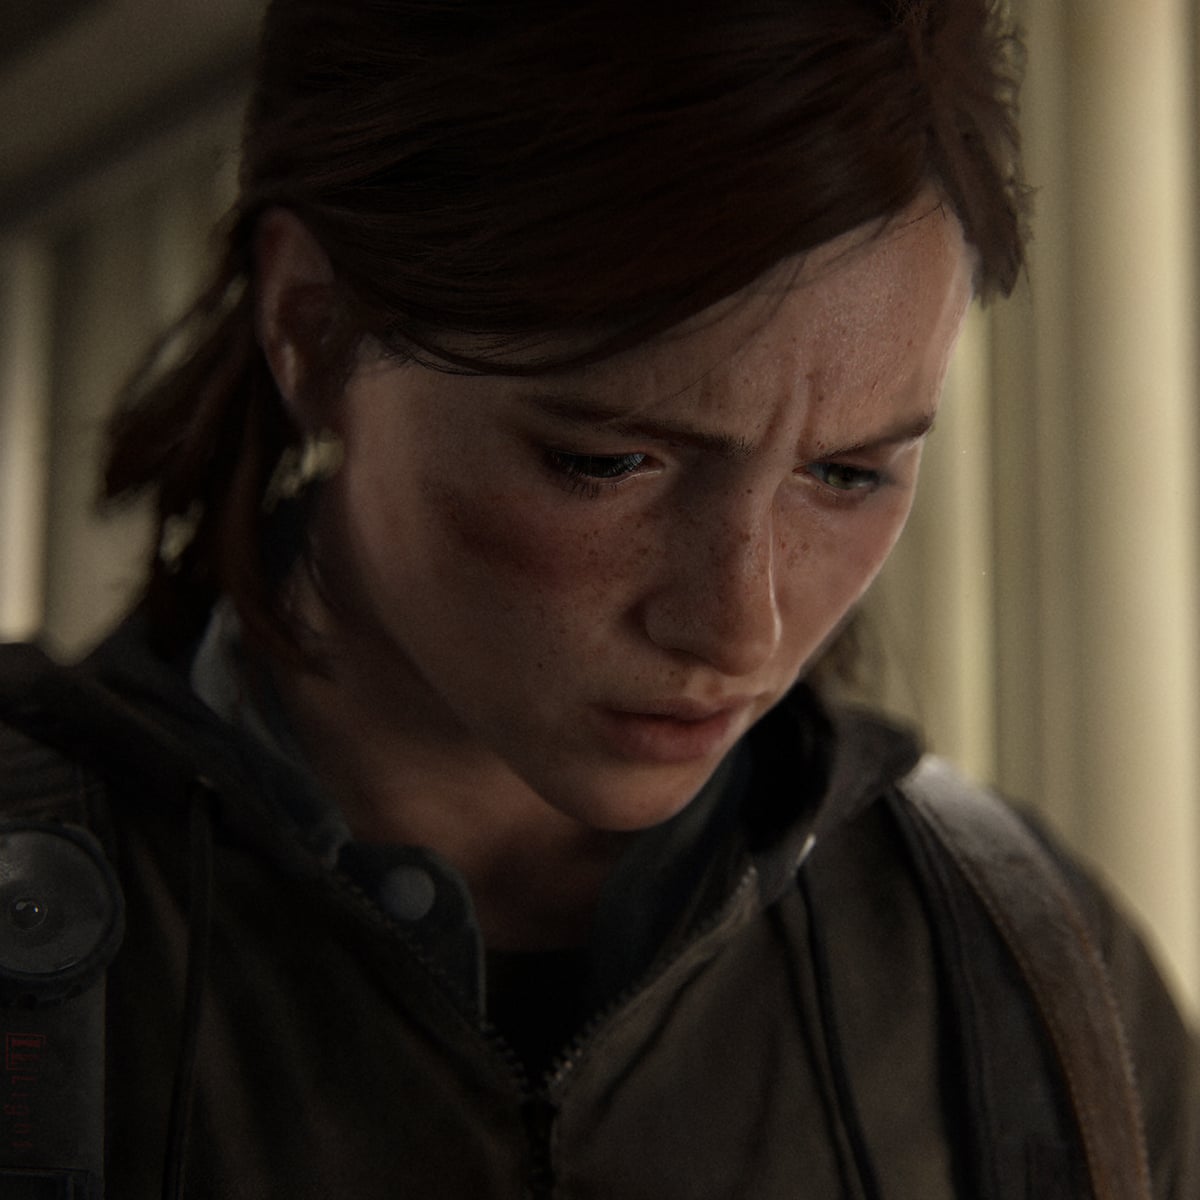 The Last of Us Part 2 review – post-apocalyptic game is groundbreaking and  powerful, Action games